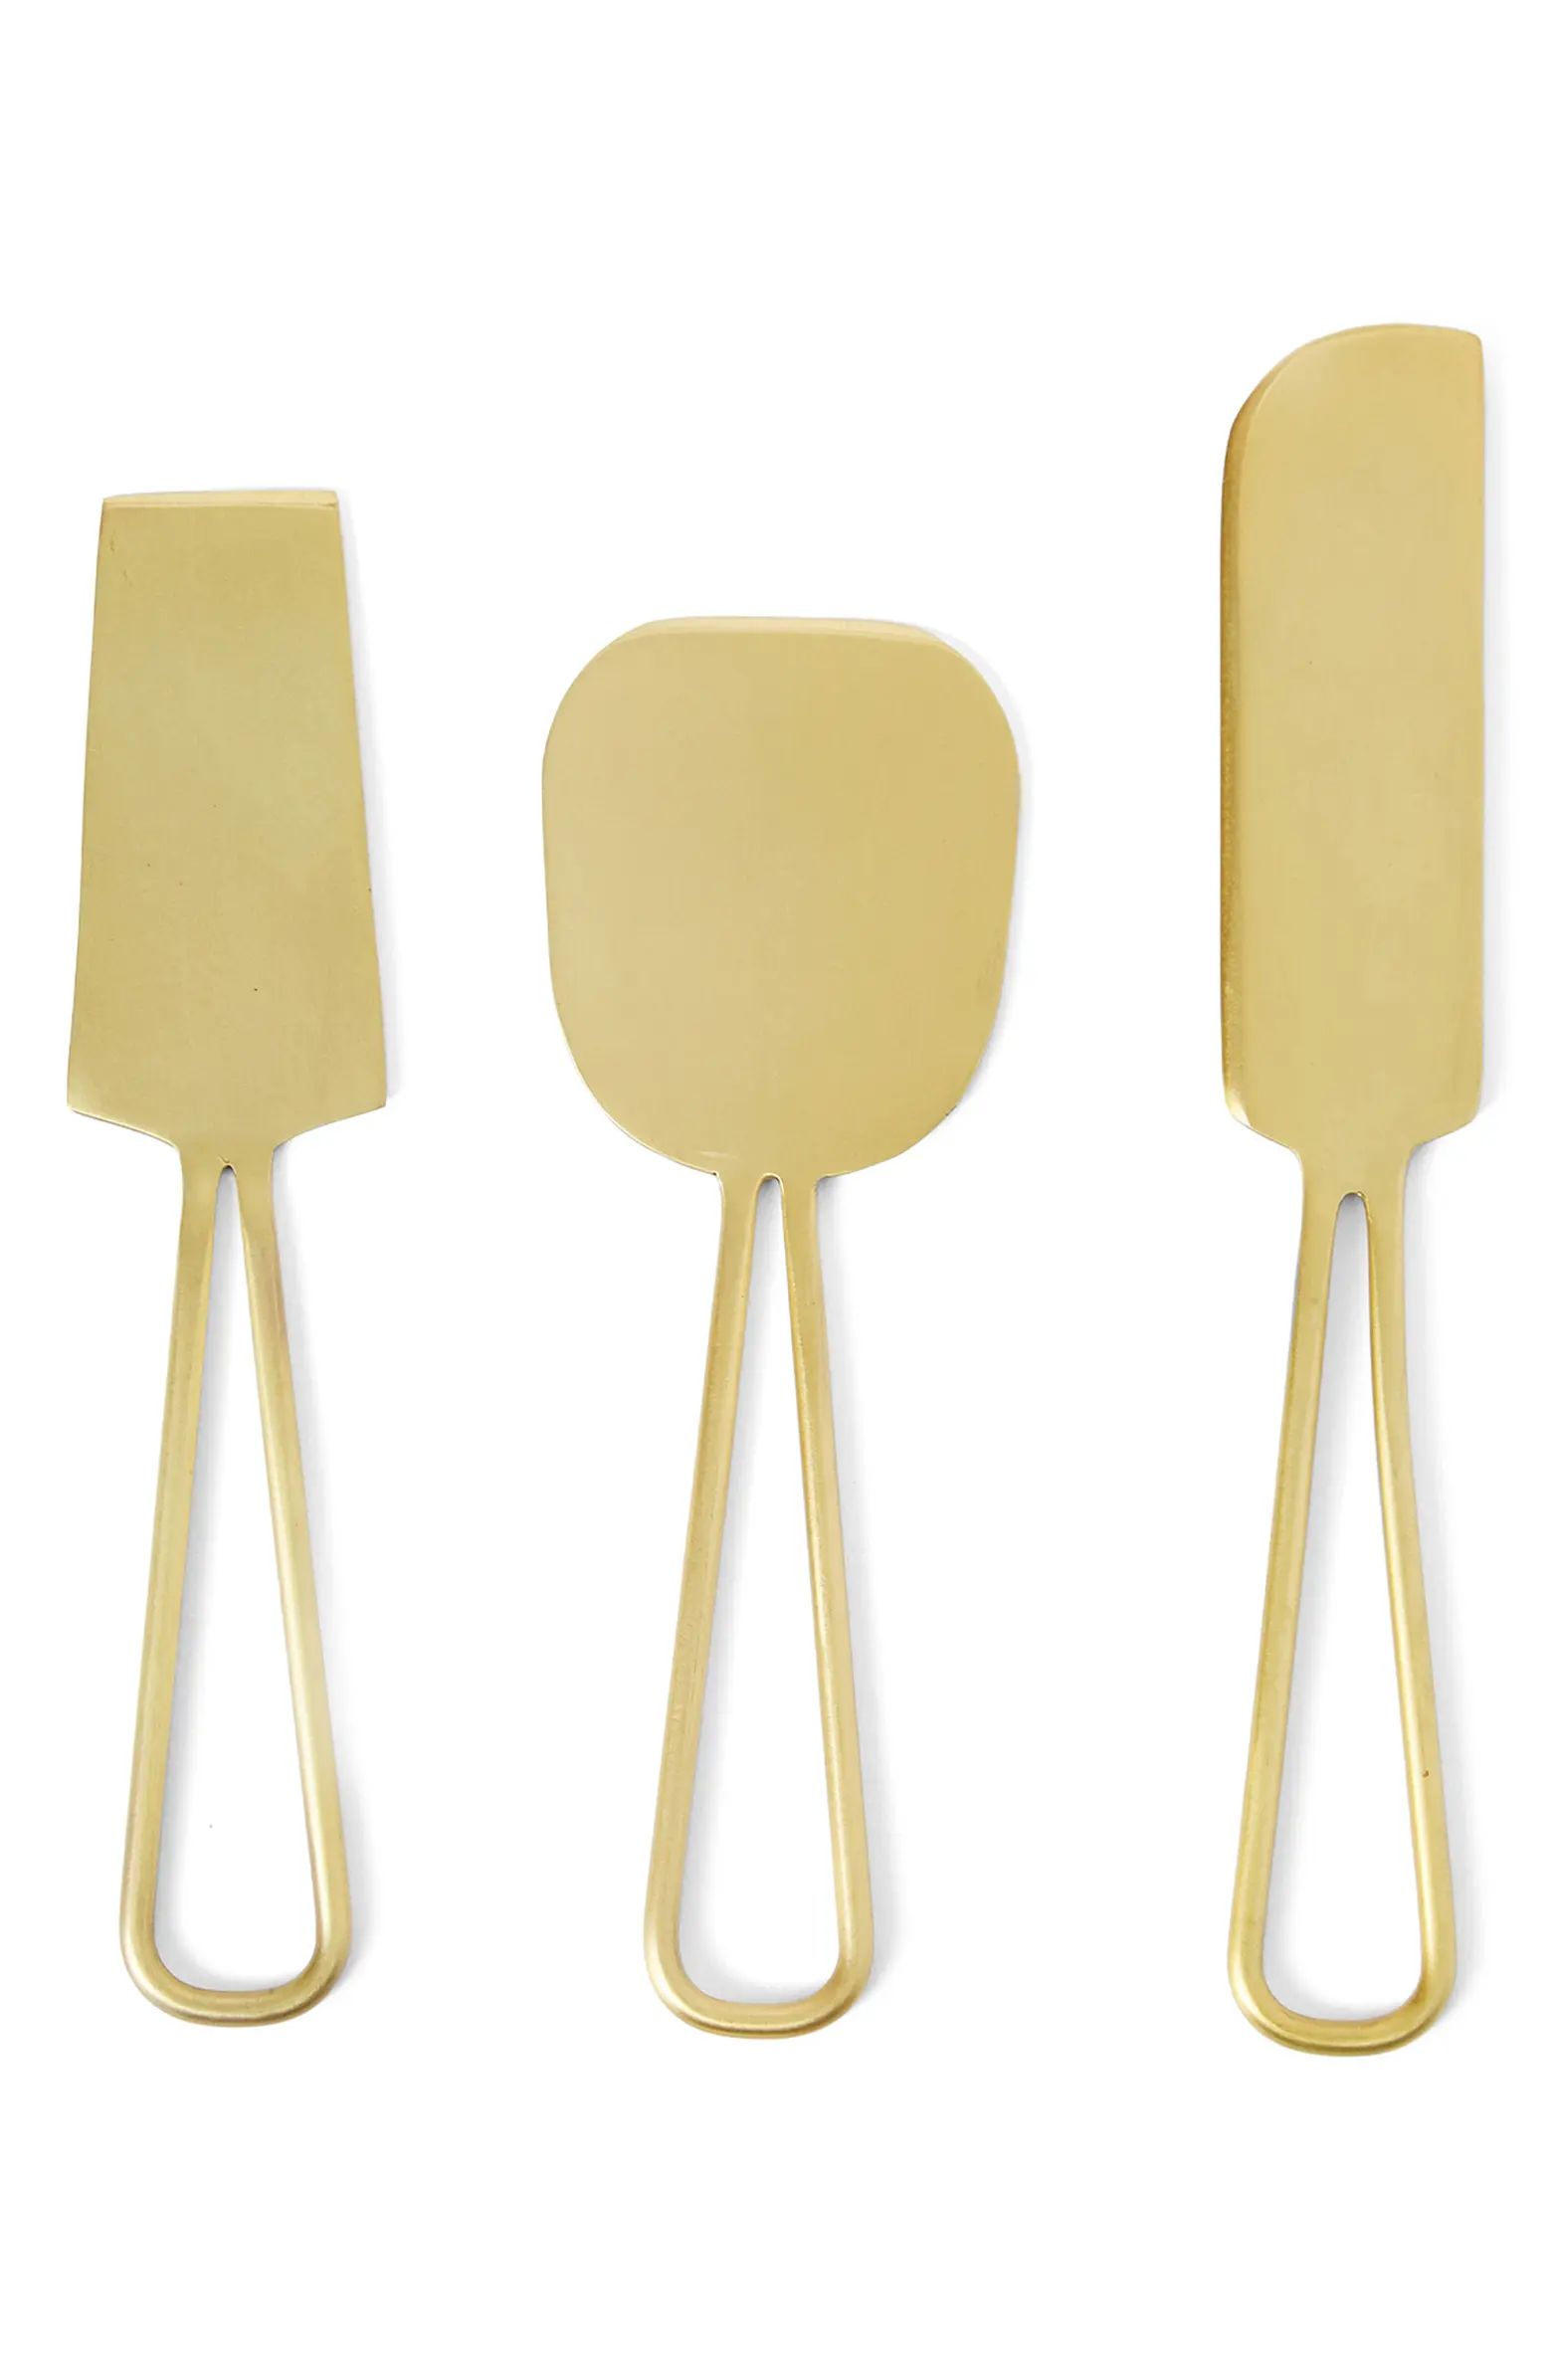 Set of 3 Cheese Knives | Nordstrom